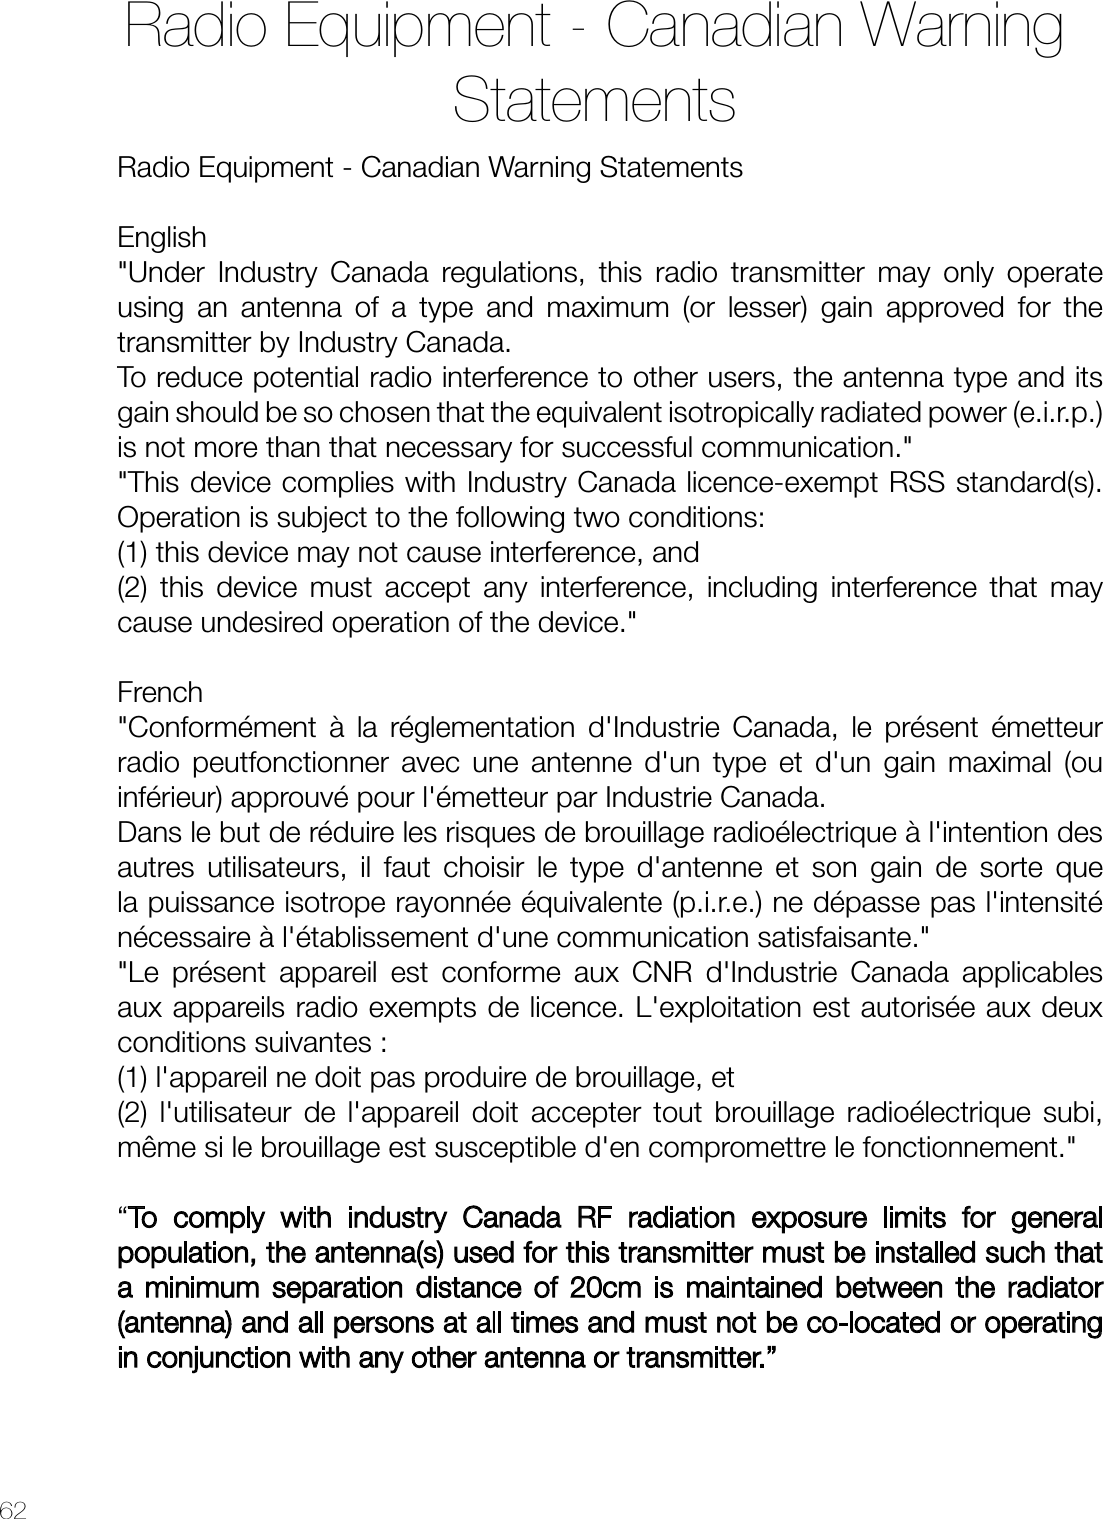 62Radio Equipment - Canadian Warning StatementsEnglish&quot;Under Industry Canada regulations, this radio transmitter may only operate using an antenna of a type and maximum (or lesser) gain approved for the transmitter by Industry Canada.To reduce potential radio interference to other users, the antenna type and its gain should be so chosen that the equivalent isotropically radiated power (e.i.r.p.) is not more than that necessary for successful communication.&quot;&quot;This device complies with Industry Canada licence-exempt RSS standard(s). Operation is subject to the following two conditions: (1) this device may not cause interference, and (2) this device must accept any interference, including interference that may cause undesired operation of the device.&quot;French&quot;Conformément à la réglementation d&apos;Industrie Canada, le présent émetteur radio peutfonctionner avec une antenne d&apos;un type et d&apos;un gain maximal (ou inférieur) approuvé pour l&apos;émetteur par Industrie Canada.Dans le but de réduire les risques de brouillage radioélectrique à l&apos;intention des autres utilisateurs, il faut choisir le type d&apos;antenne et son gain de sorte que la puissance isotrope rayonnée équivalente (p.i.r.e.) ne dépasse pas l&apos;intensité nécessaire à l&apos;établissement d&apos;une communication satisfaisante.&quot;&quot;Le présent appareil est conforme aux CNR d&apos;Industrie Canada applicables aux appareils radio exempts de licence. L&apos;exploitation est autorisée aux deux conditions suivantes :(1) l&apos;appareil ne doit pas produire de brouillage, et (2) l&apos;utilisateur de l&apos;appareil doit accepter tout brouillage radioélectrique subi, même si le brouillage est susceptible d&apos;en compromettre le fonctionnement.&quot;“To comply with industry Canada RF radiation exposure limits for general population, the antenna(s) used for this transmitter must be installed such that a minimum separation distance of 20cm is maintained between the radiator (antenna) and all persons at all times and must not be co-located or operating in conjunction with any other antenna or transmitter.”Radio Equipment - Canadian Warning Statements